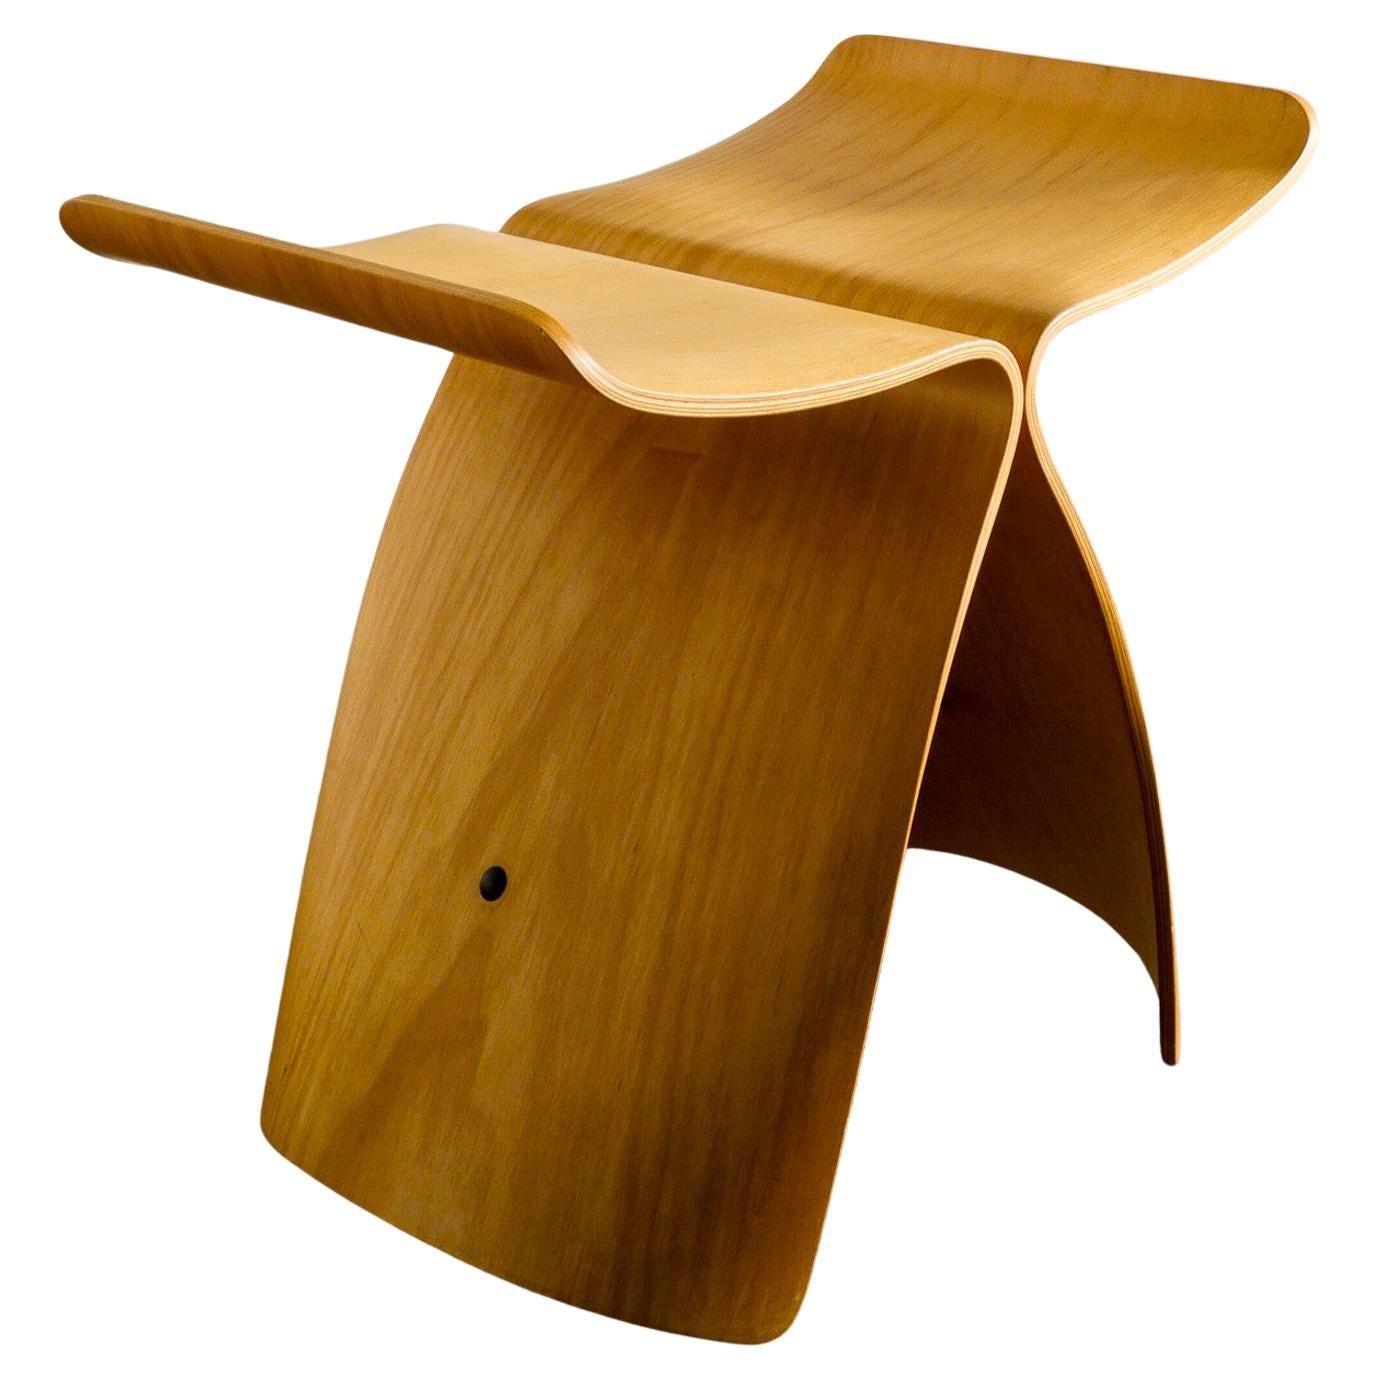 Sori Yanagi "Butterfly" Mid Century Stool in Plywood Produced by Tendo, 1980s